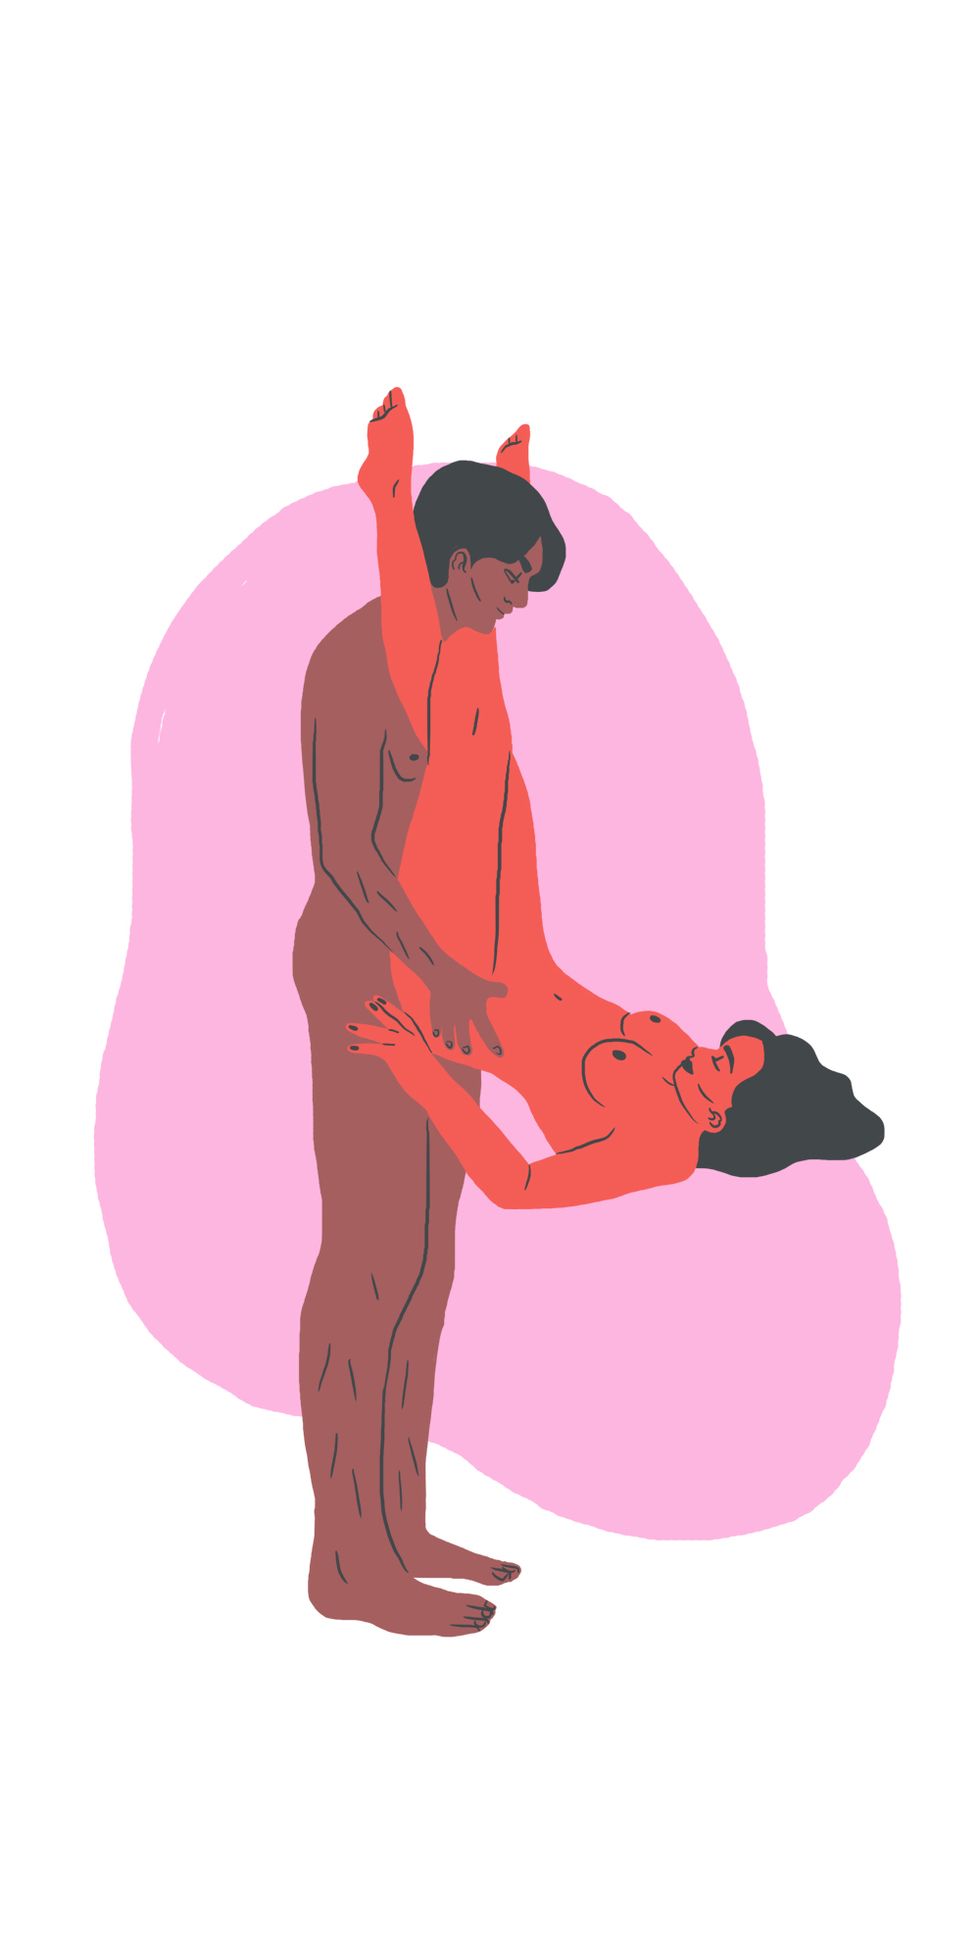 exciting sex positions